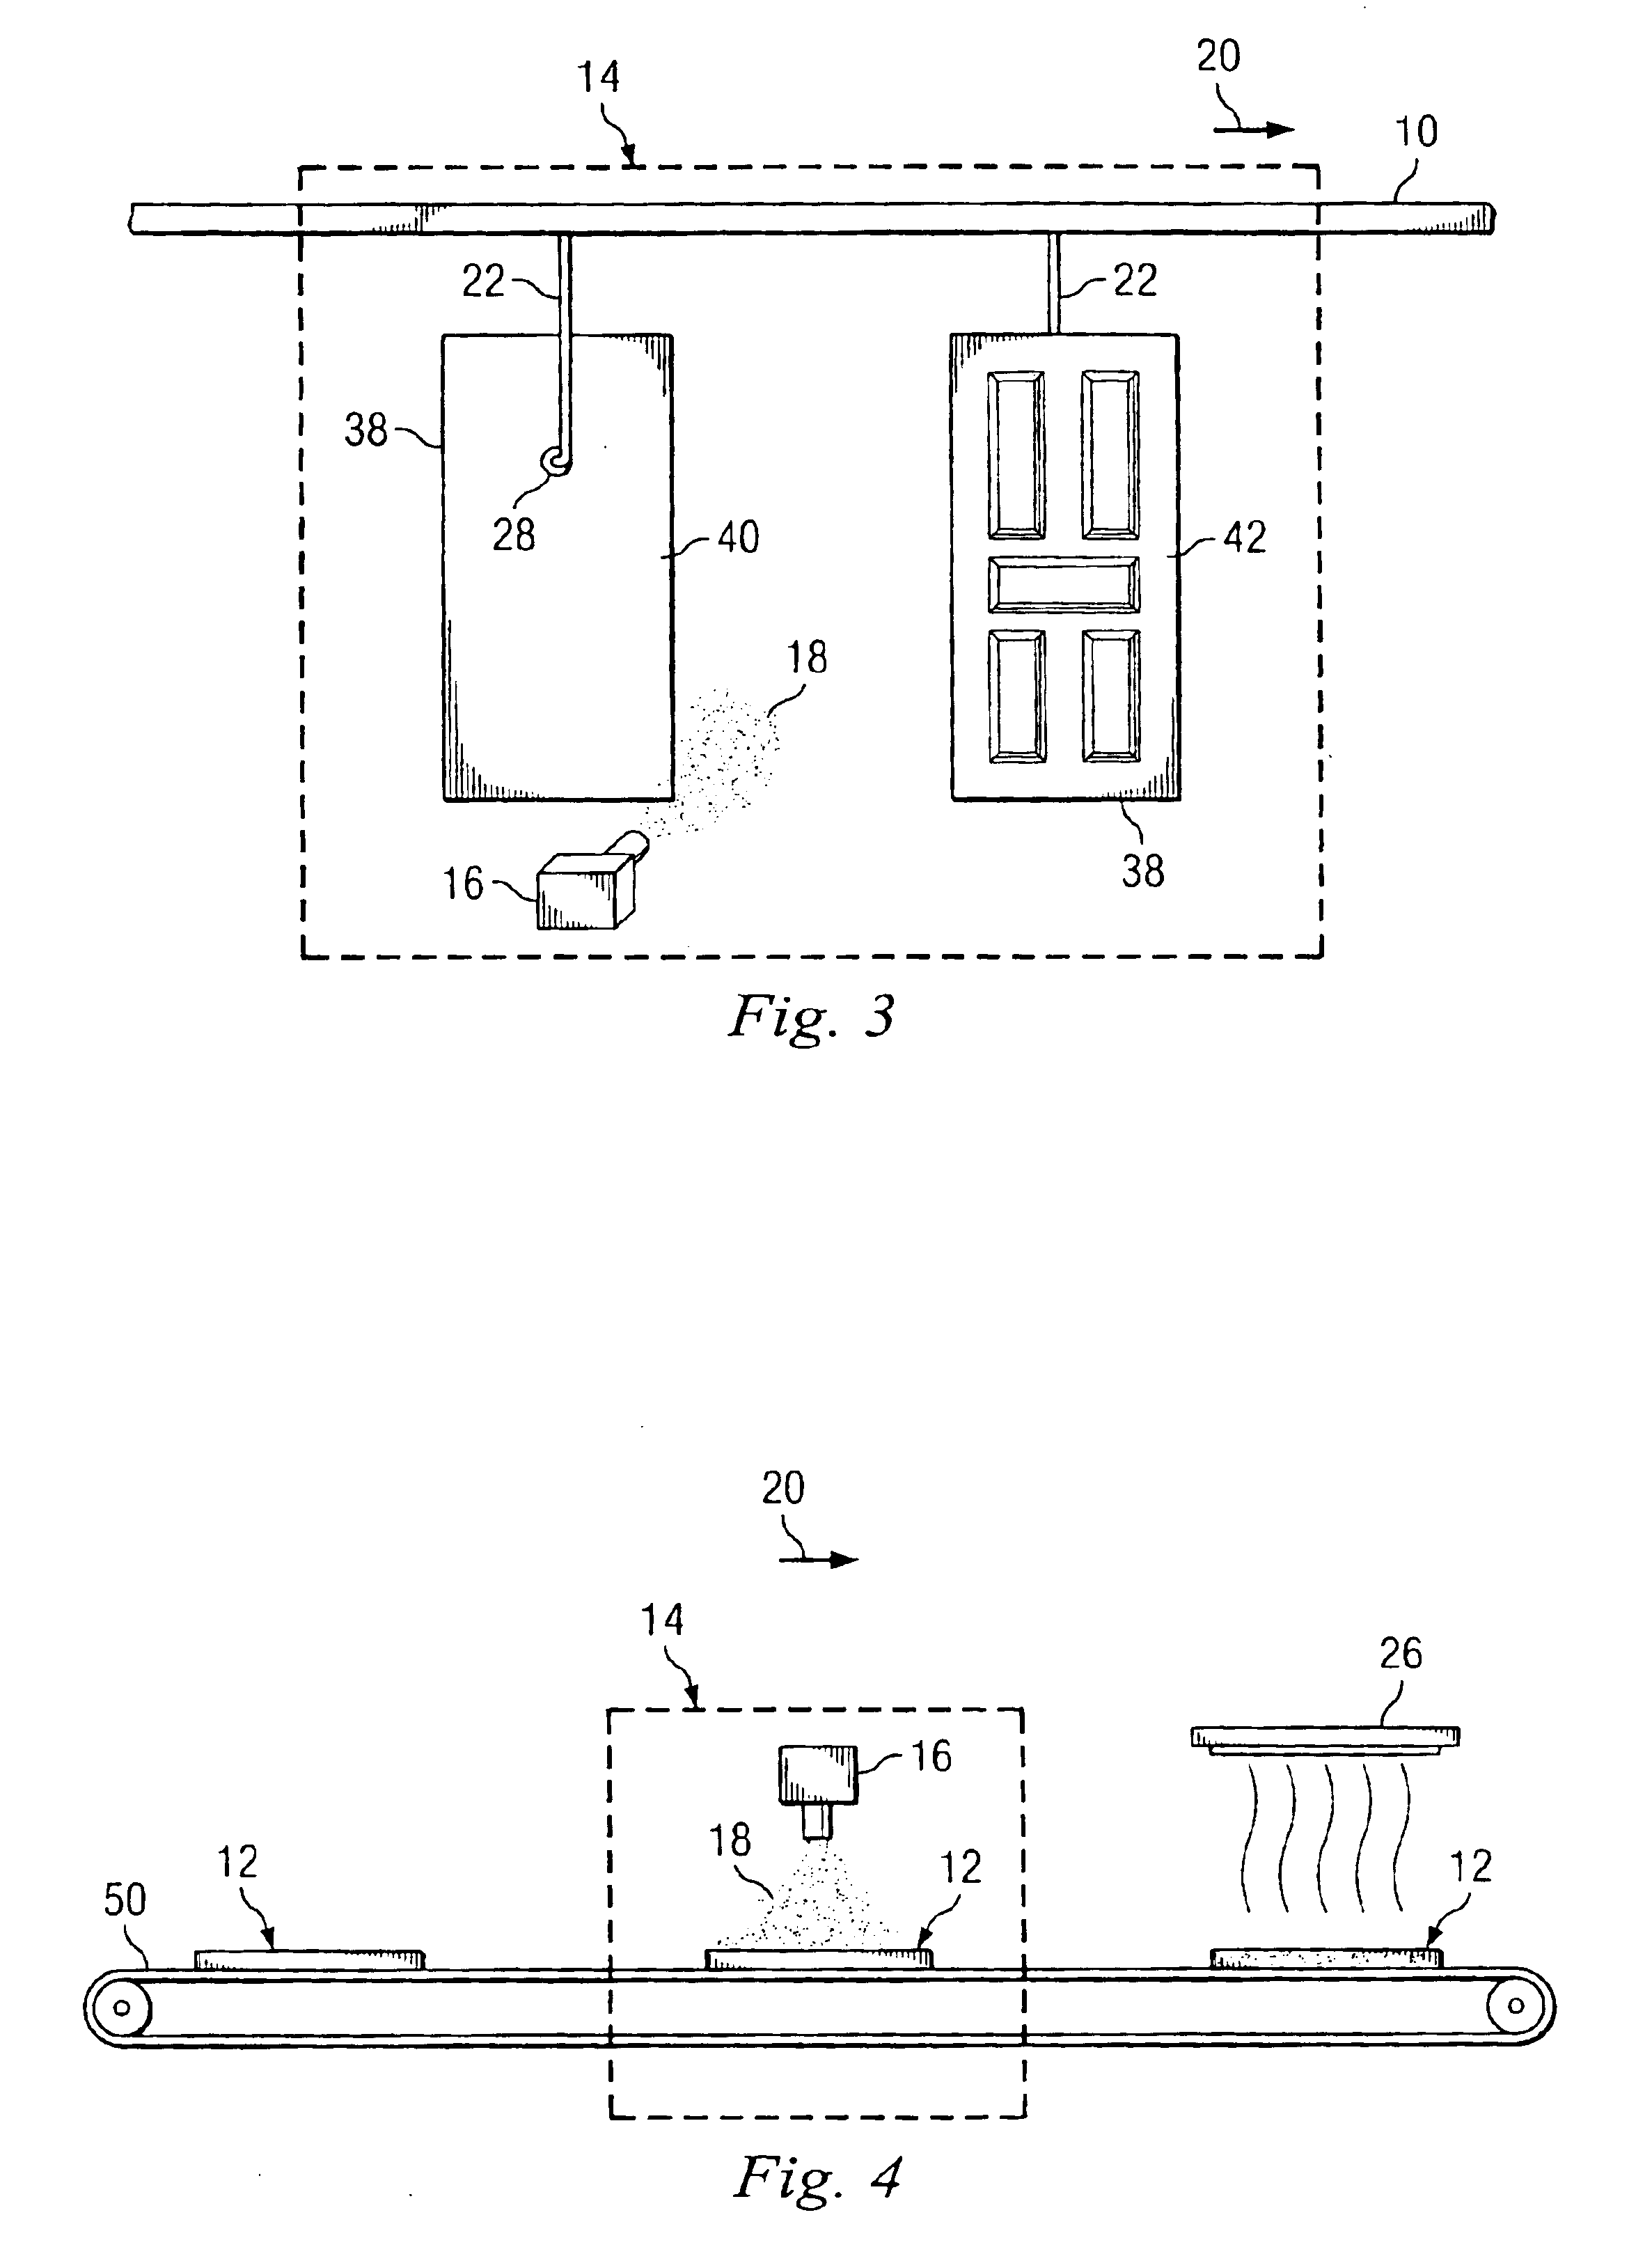 Method and system for powder coating passage doors